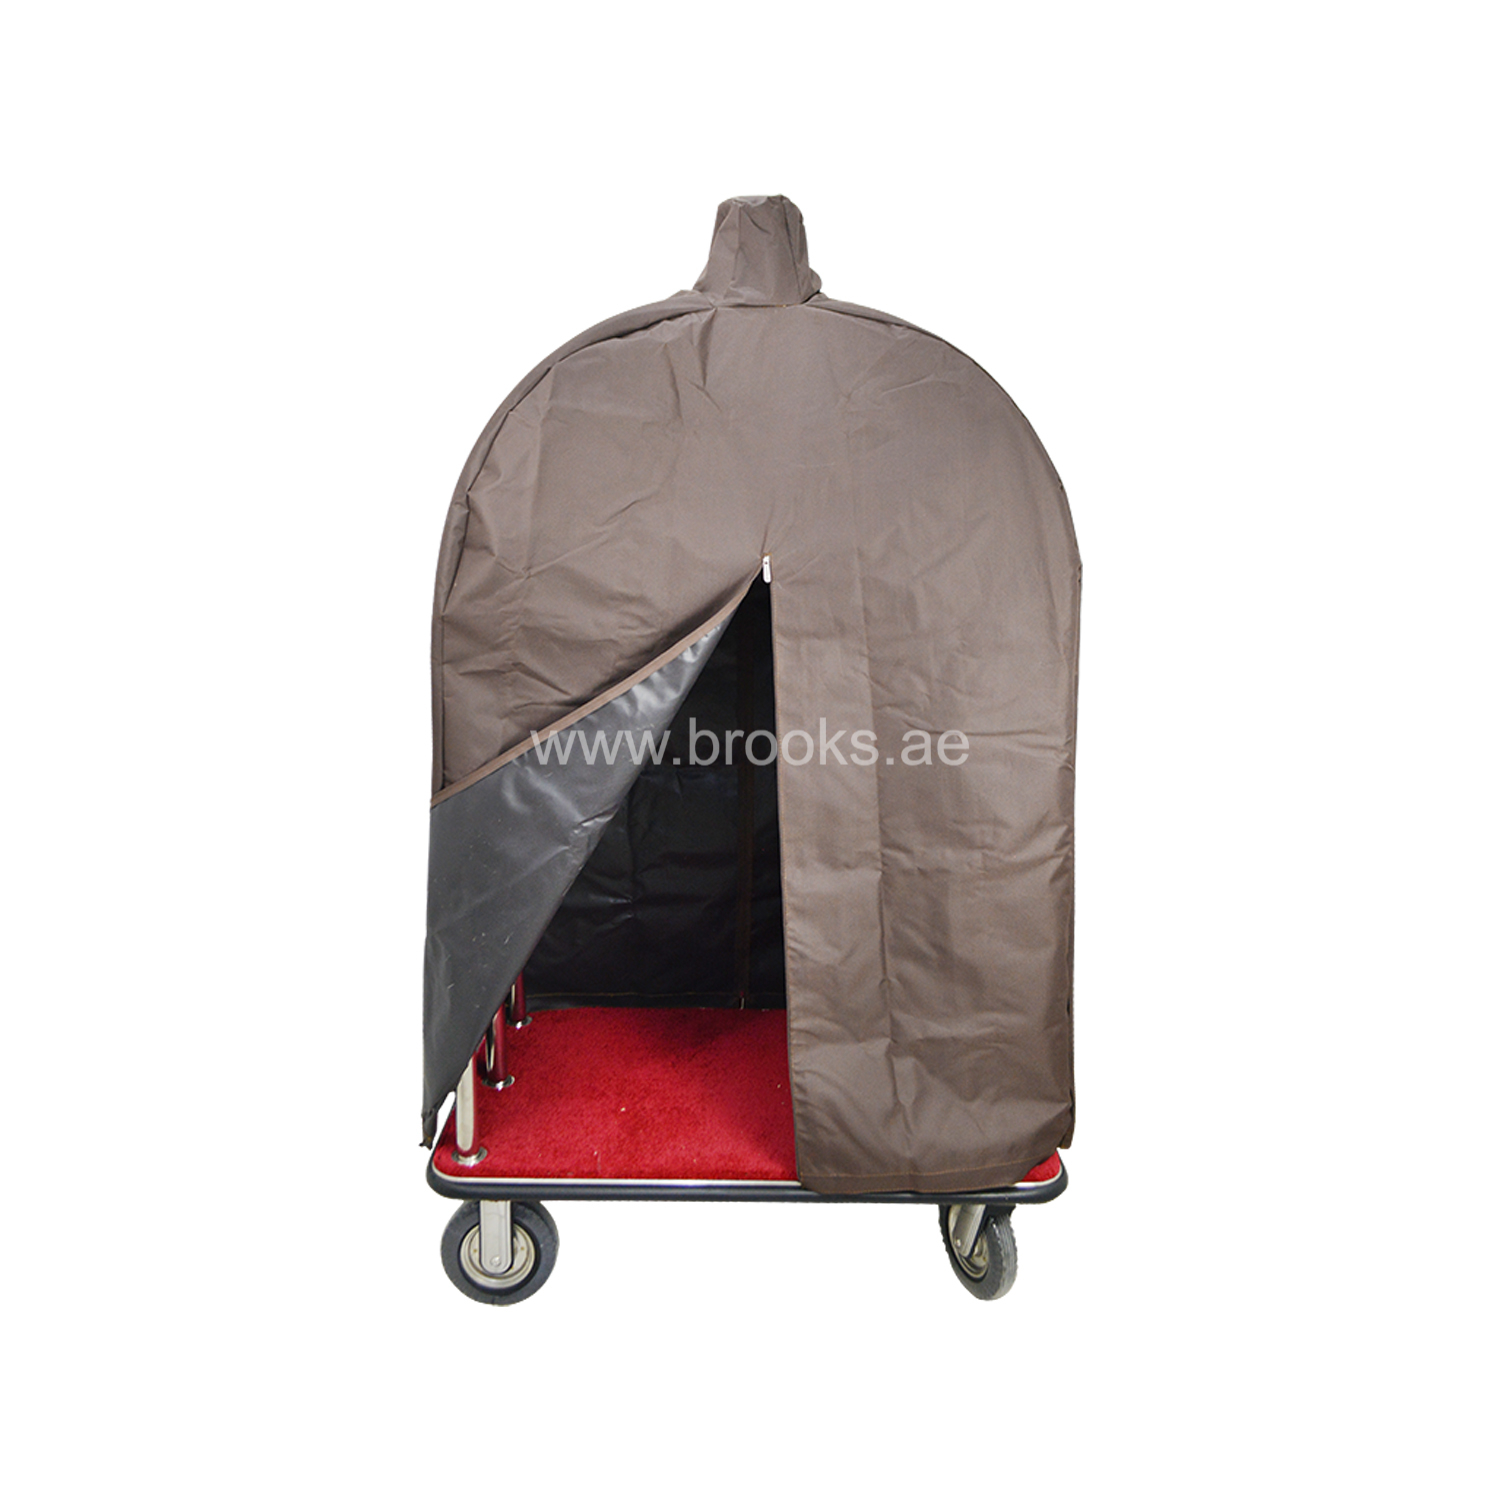 Brooks Luggage Trolley Cover